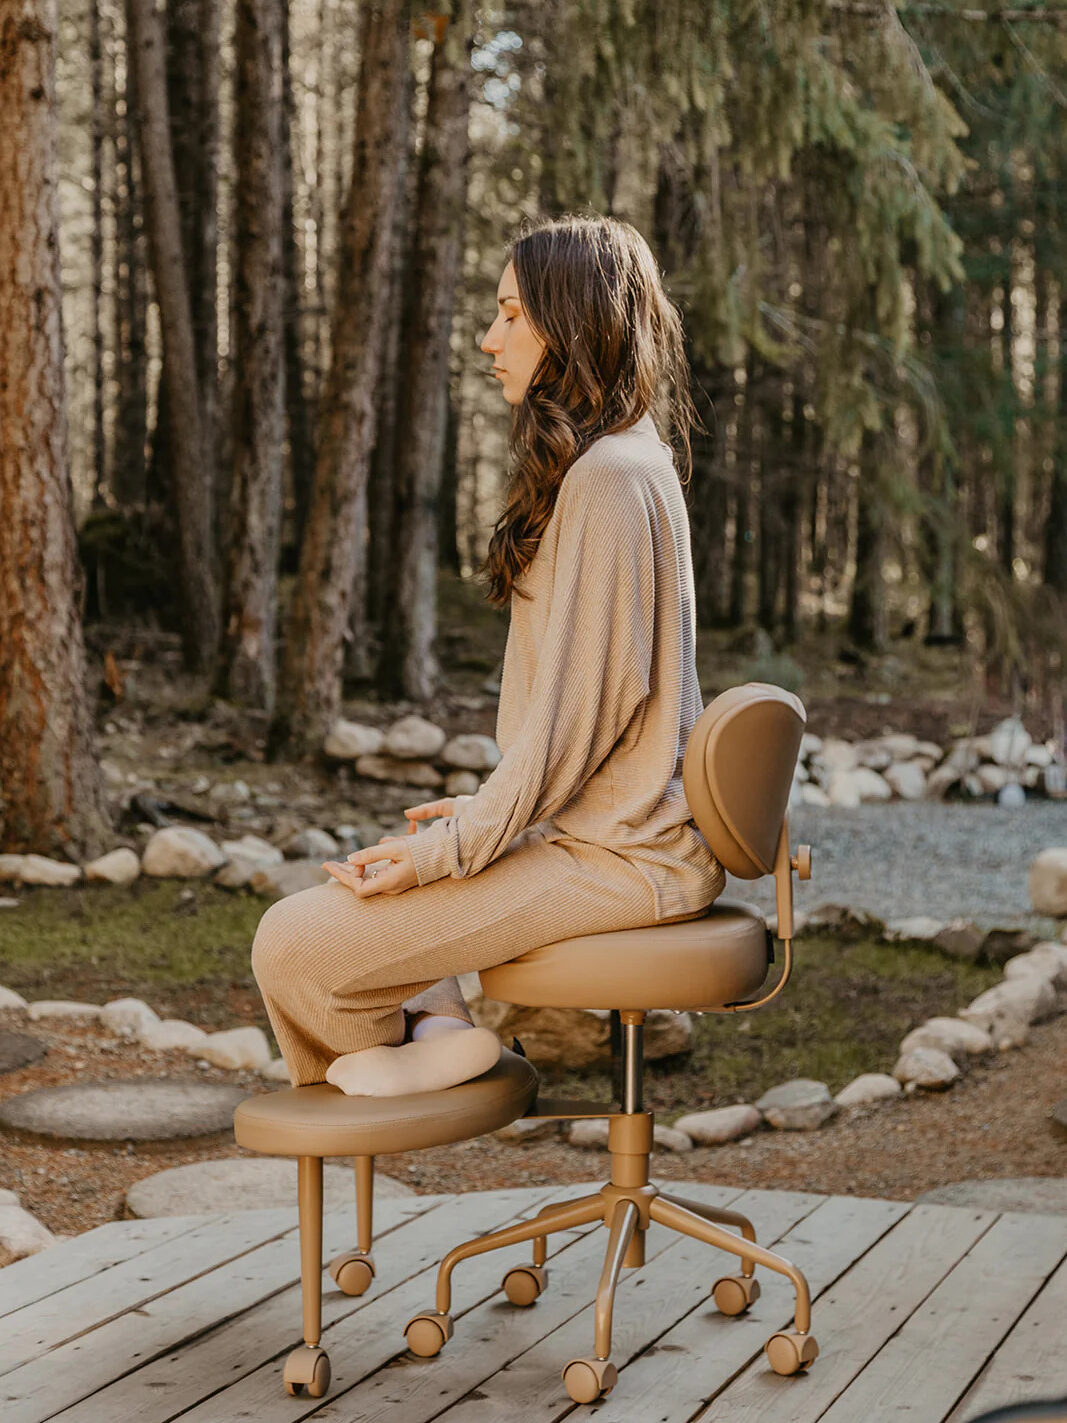 A woman in a beige outfit sits on a rolling chair on a wooden deck, surrounded by a forest and sunlight filtering through the trees, holding massage guns.